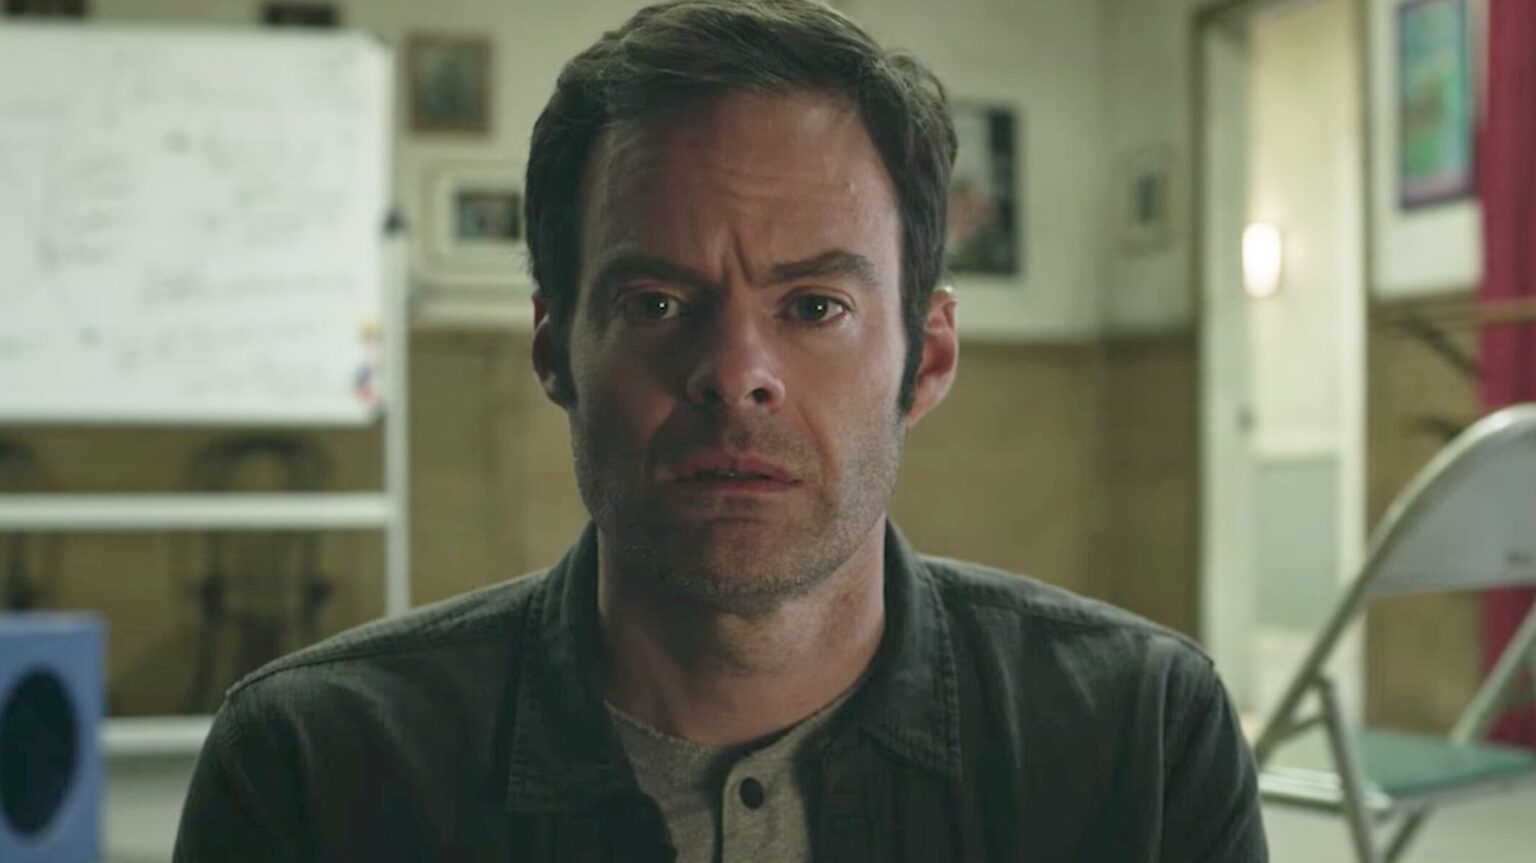 Bill Hader's Journey From SNL To South Park Collaborator